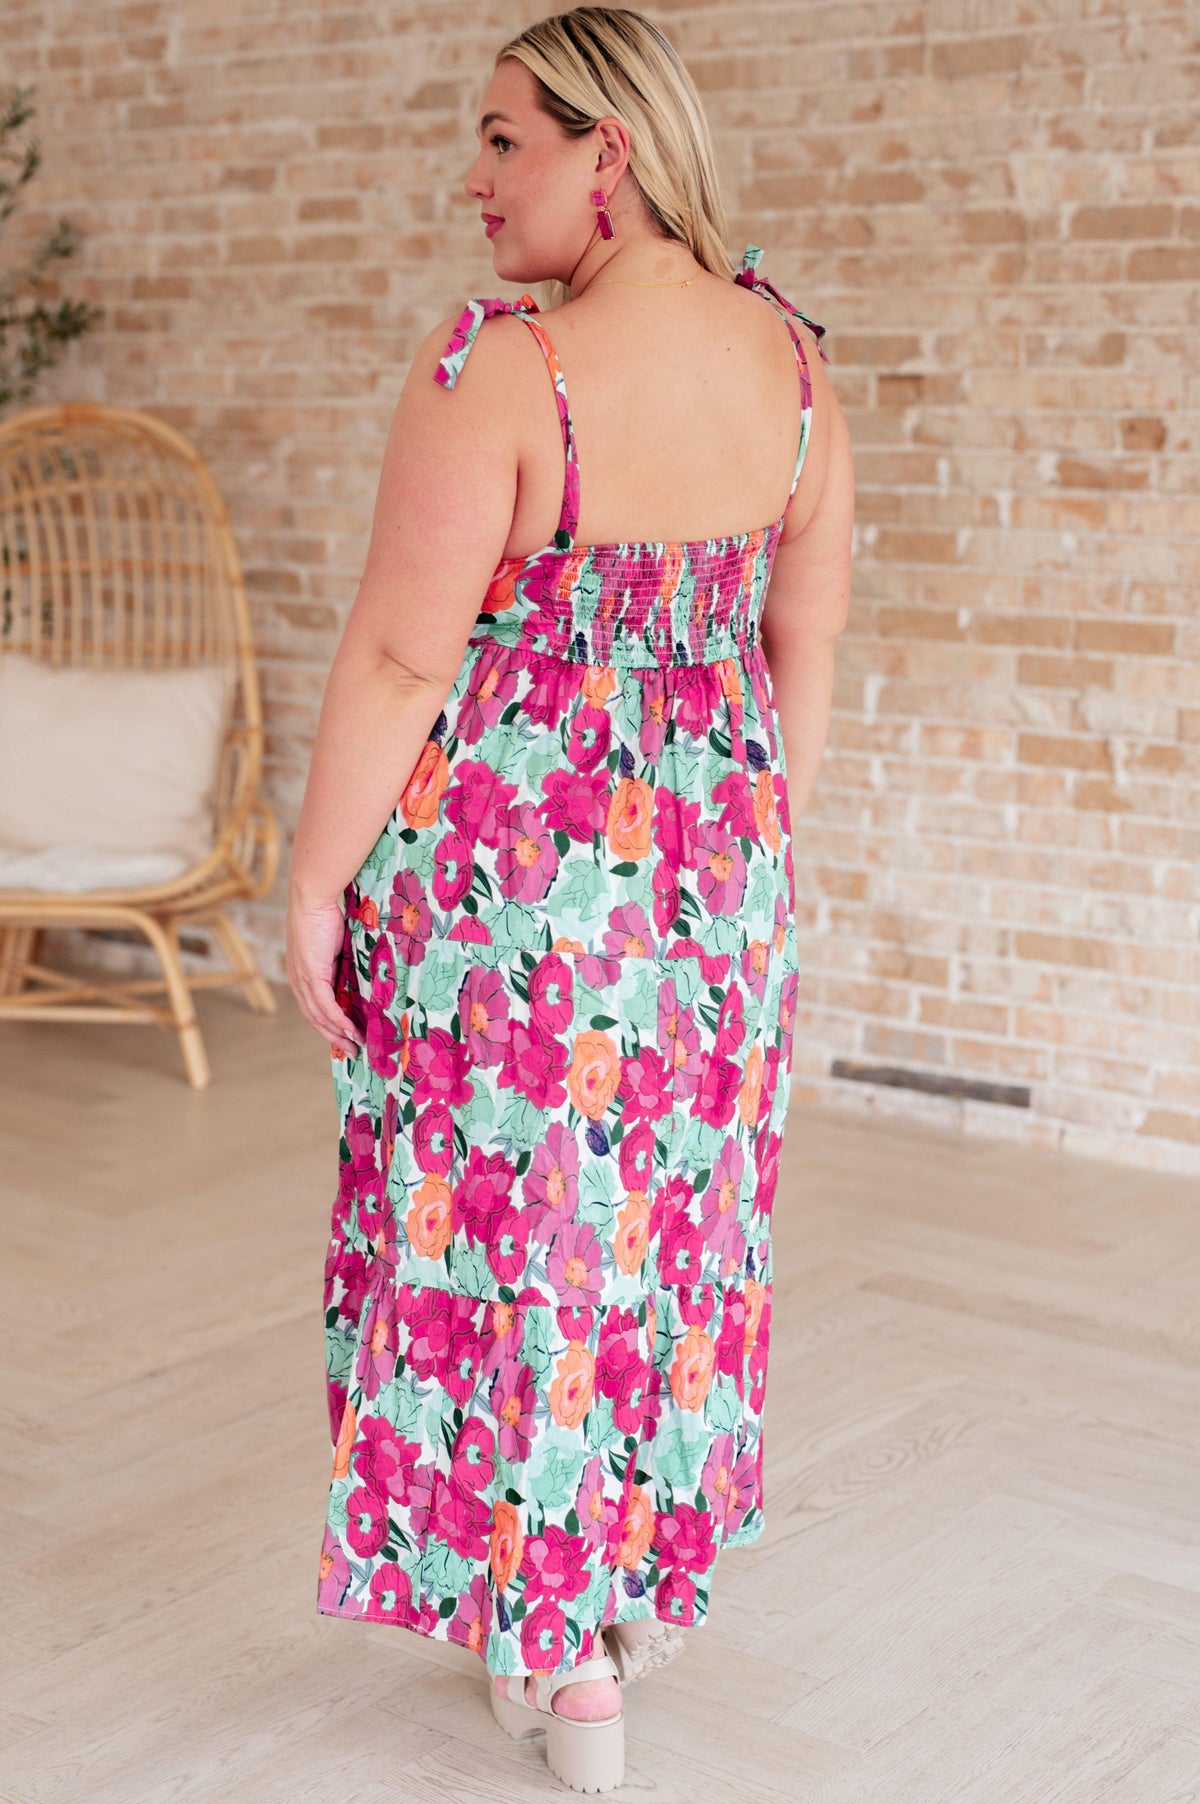 Such a Lover Girl Tiered Dress - becauseofadi